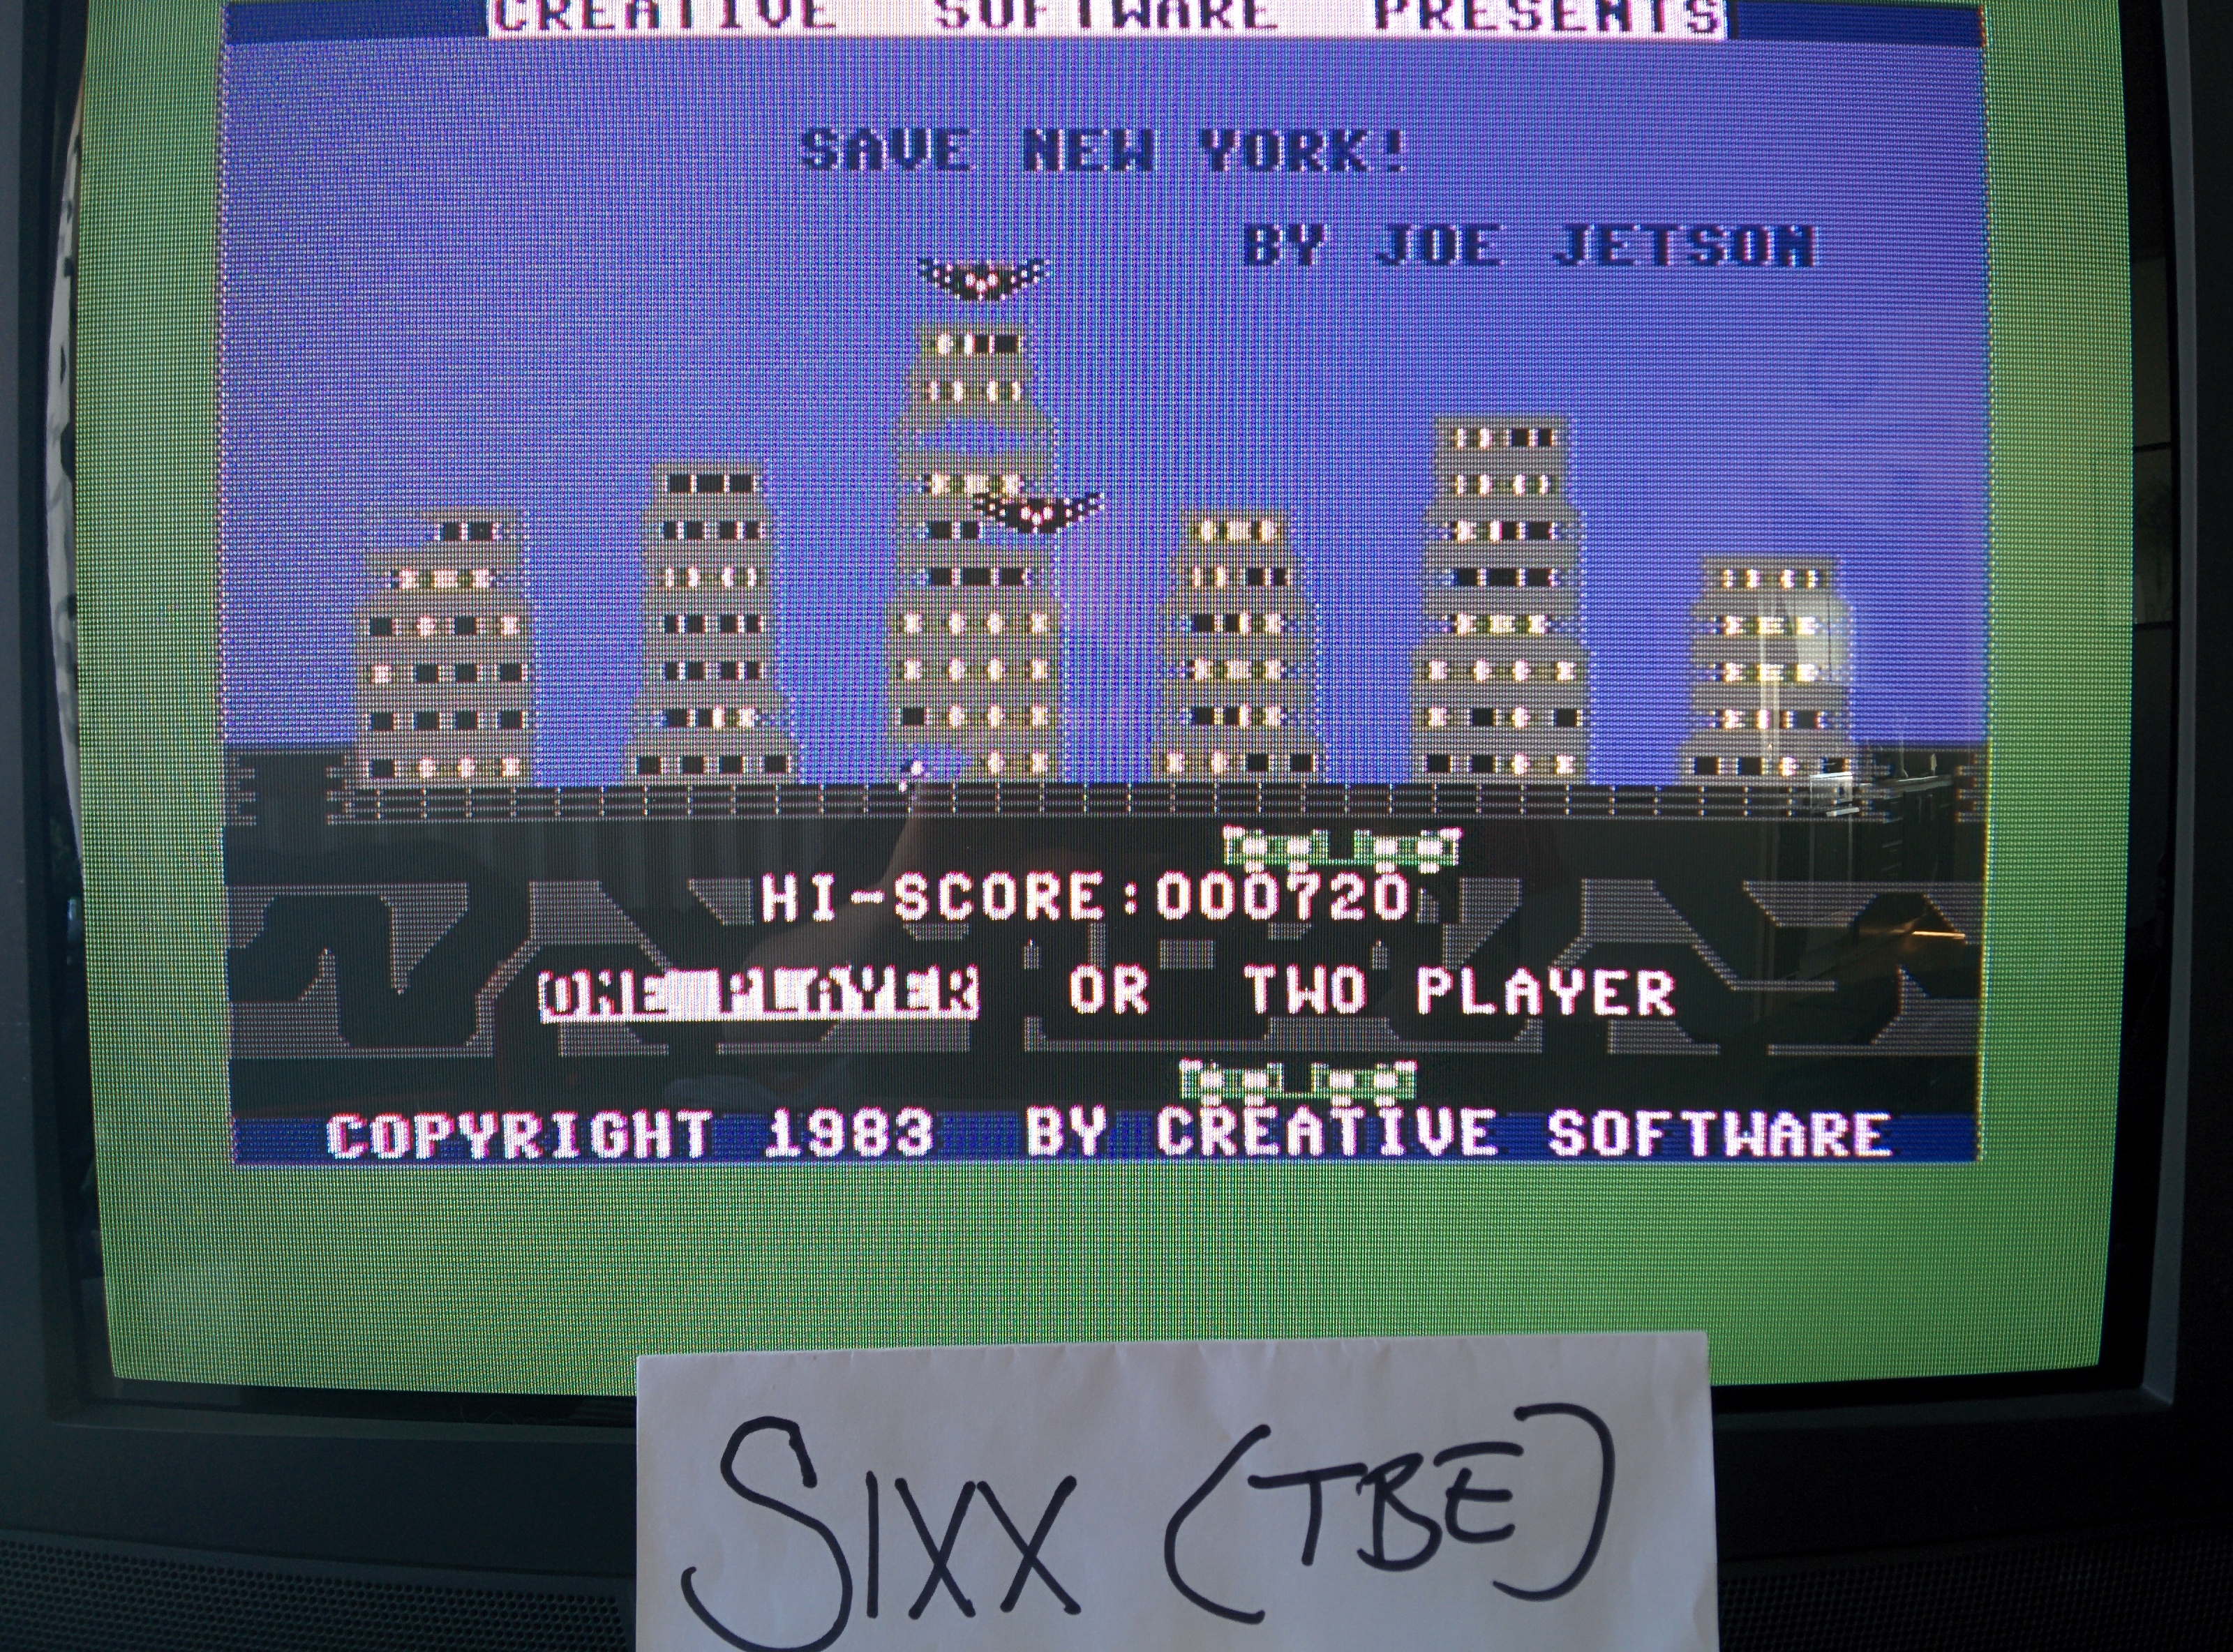 Sixx: Save New York (Commodore 64) 720 points on 2014-05-05 06:41:07